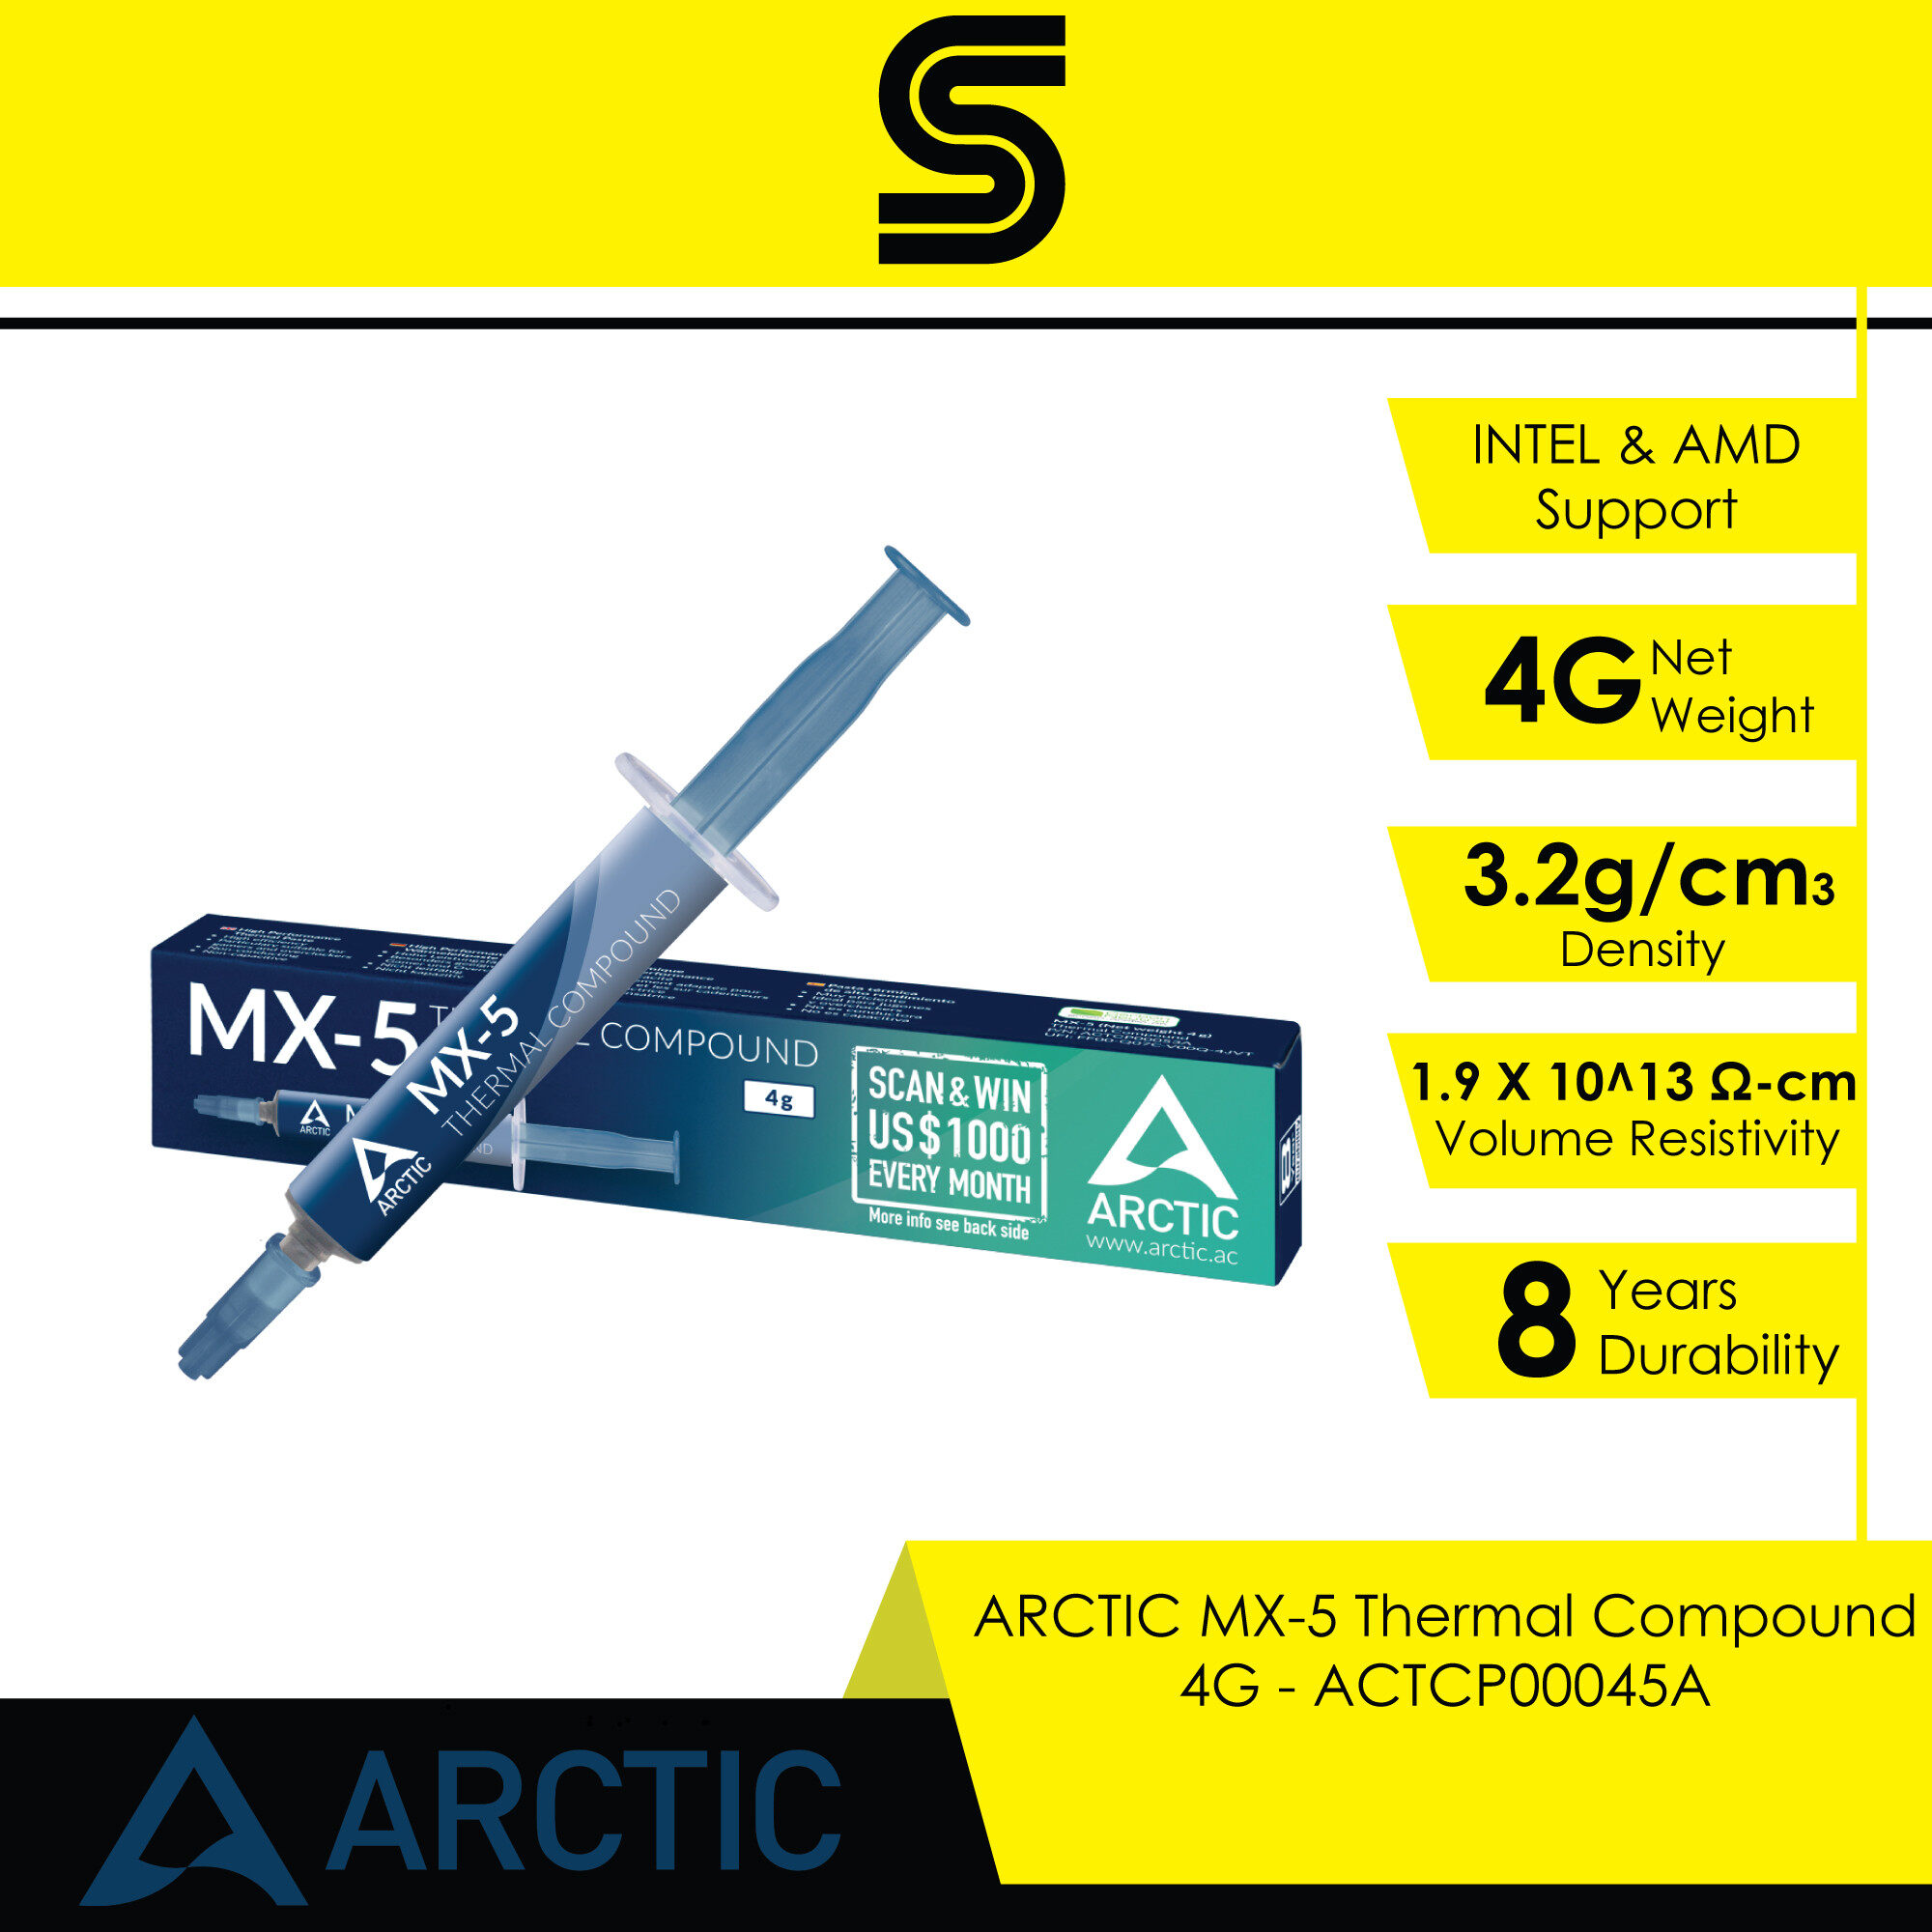 ARCTIC MX-5 Thermal Compound 4G - ACTCP00045A